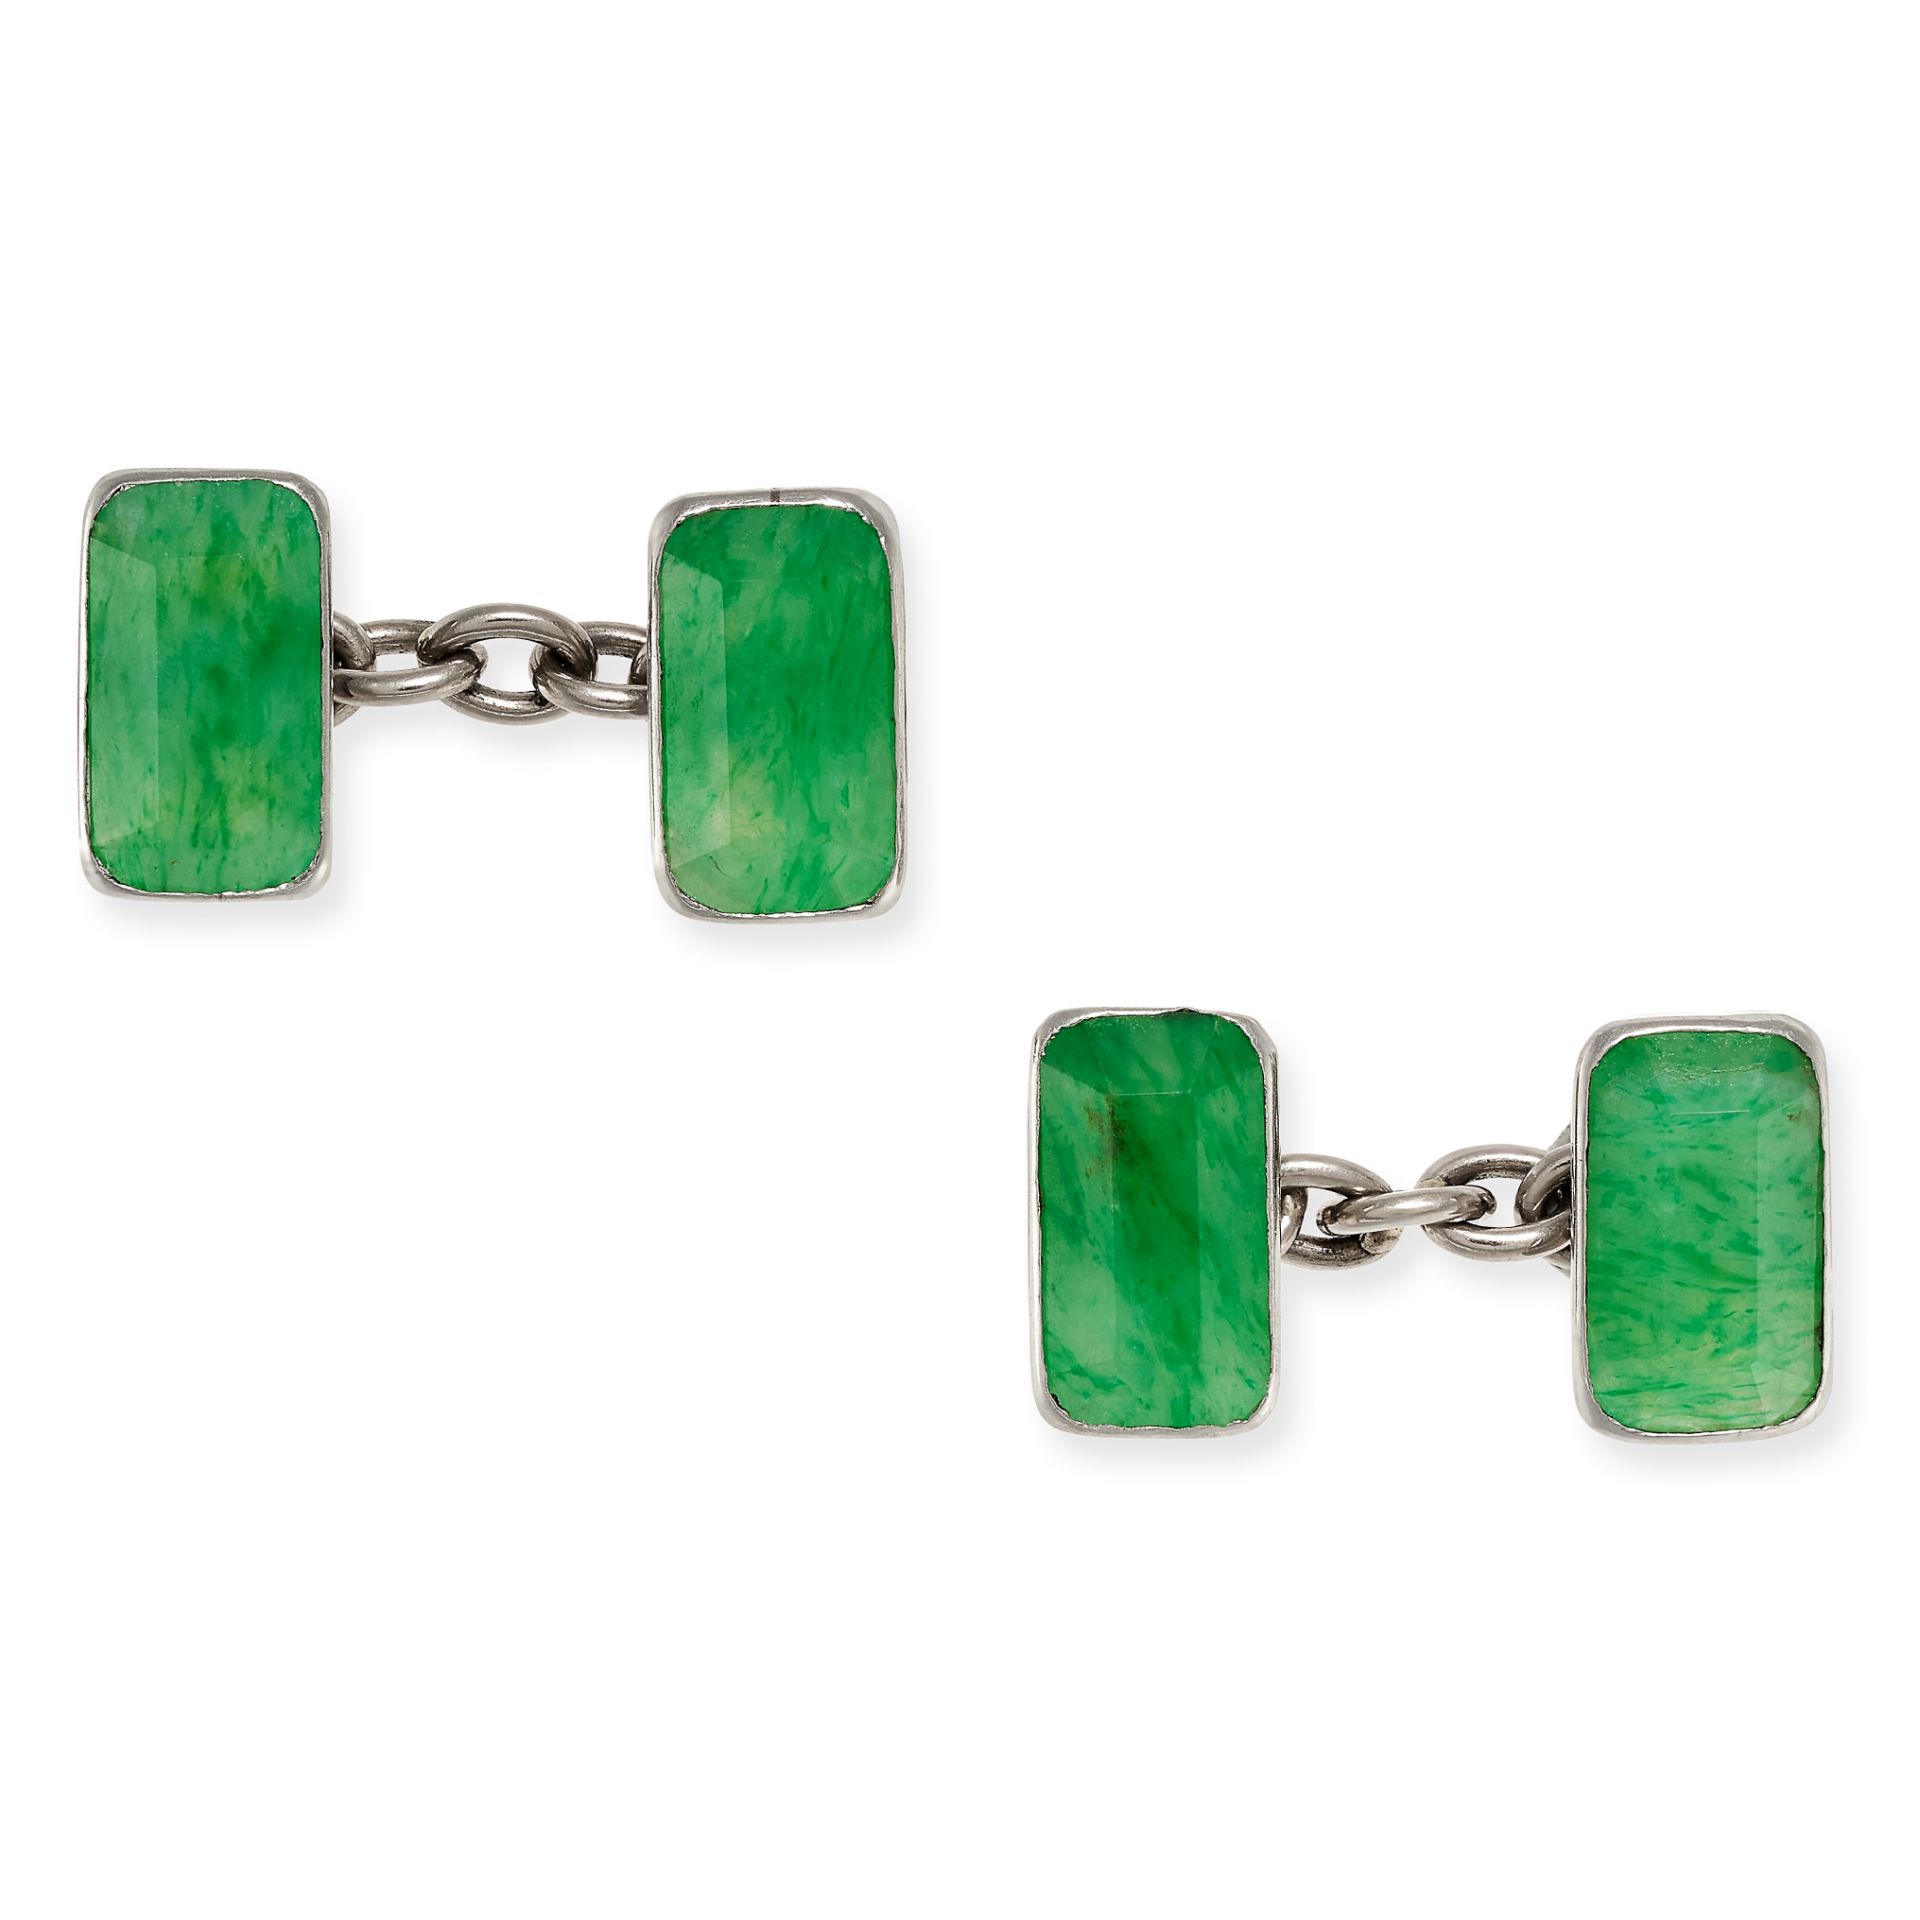 A PAIR OF NATURAL JADEITE JADE CUFFLINKS each comprising of two faces set with a faceted jade, no